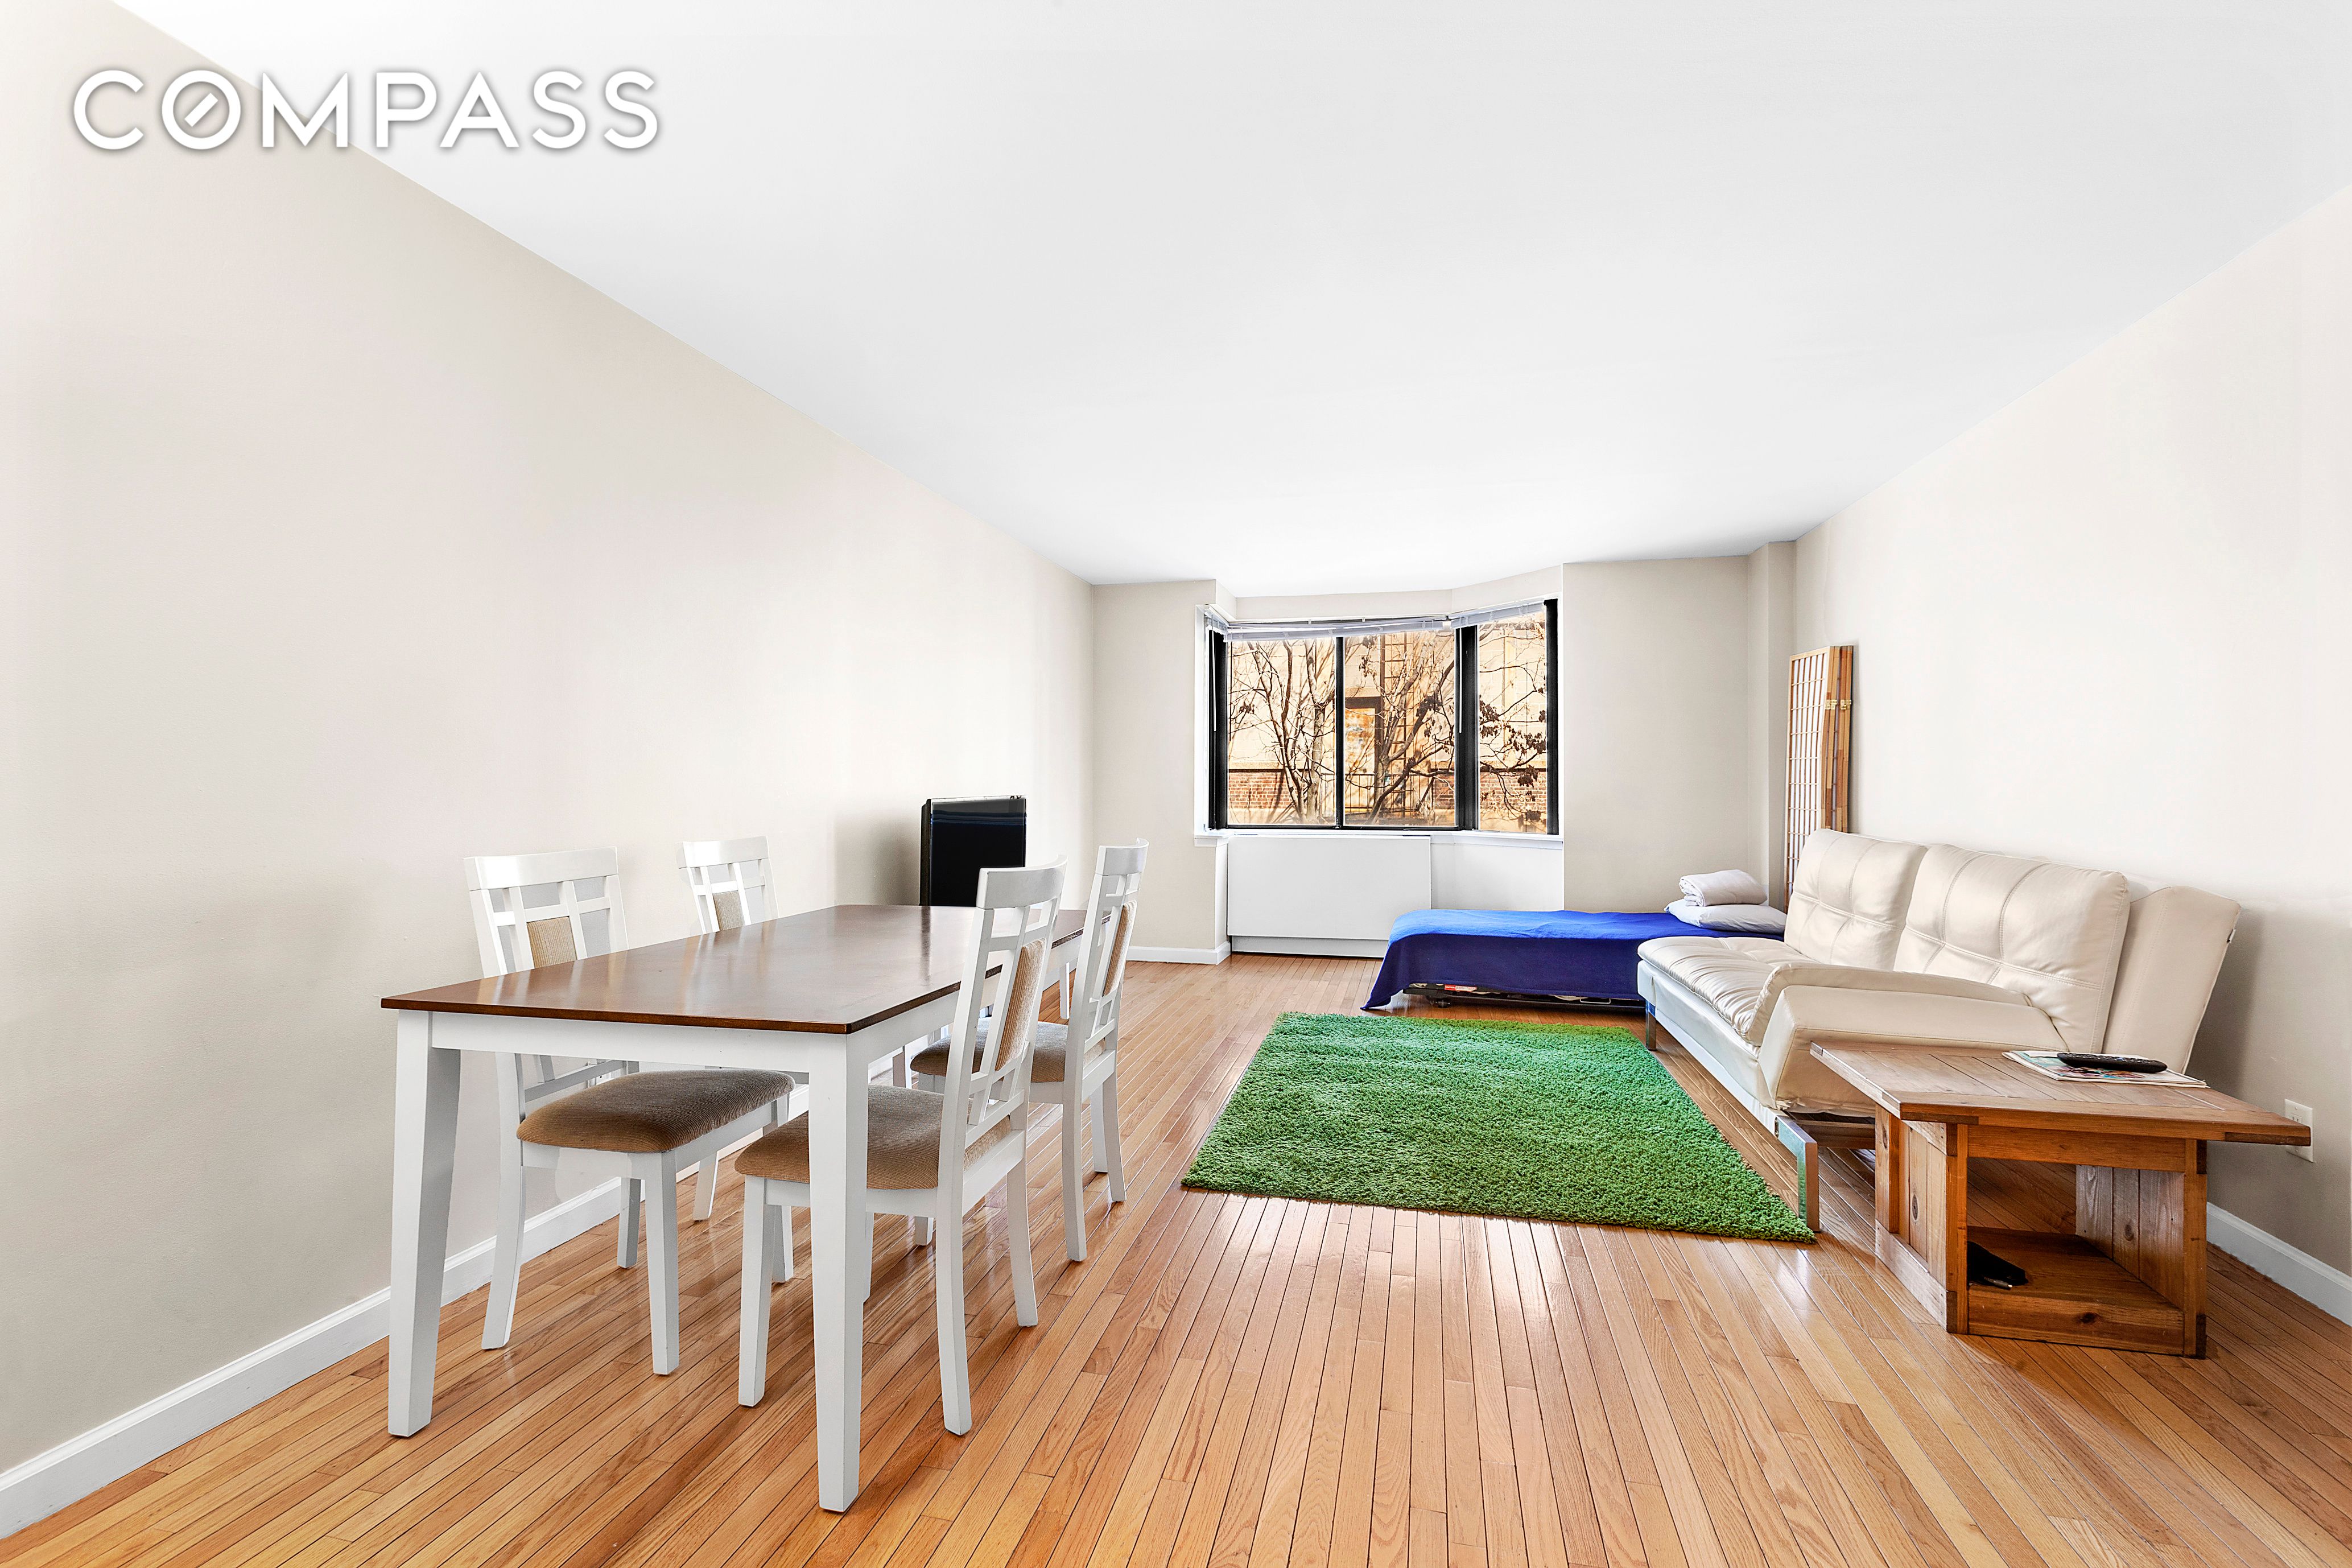 445 West 54th Street 4B, Hell S Kitchen, Midtown West, NYC - 2 Bedrooms  
2 Bathrooms  
6 Rooms - 